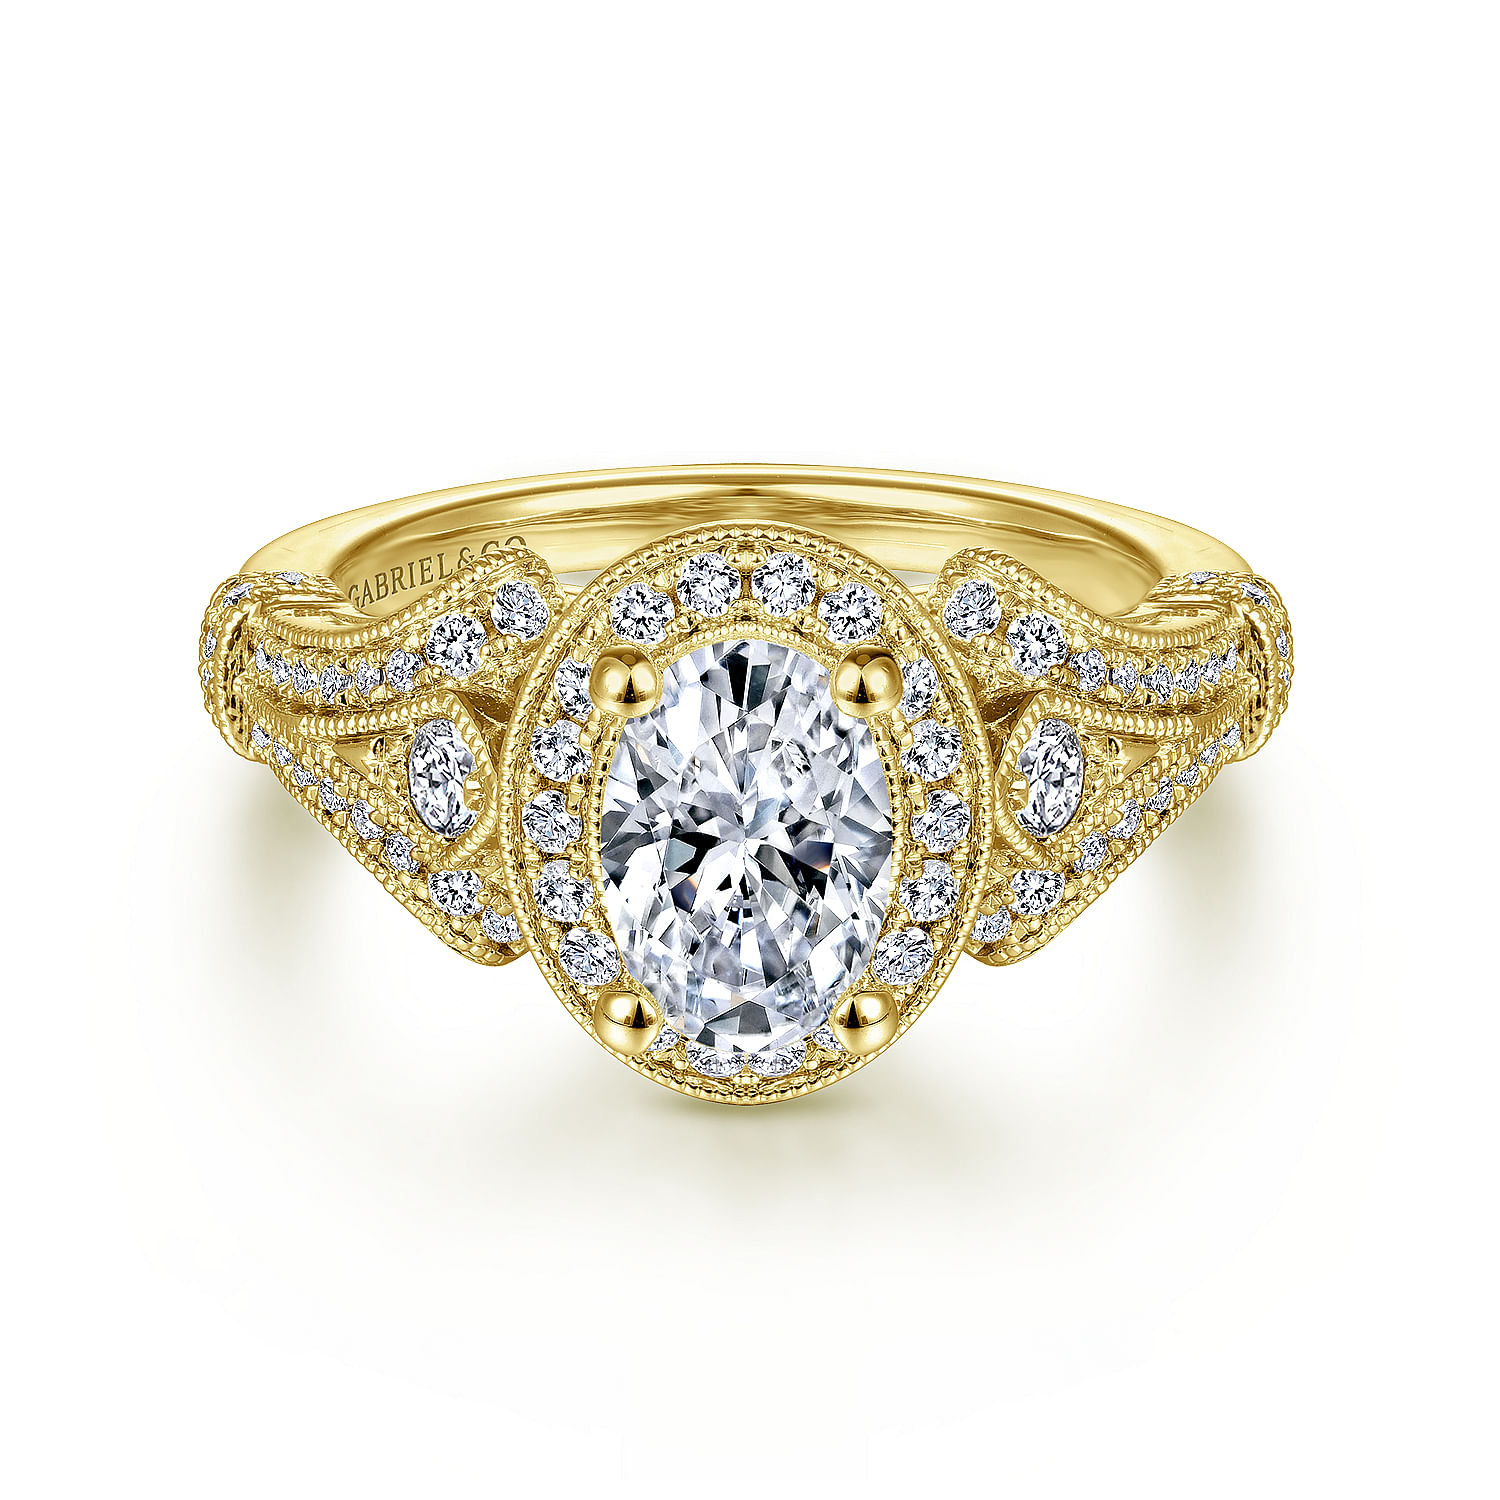 Delilah - Vintage Inspired 14K Yellow Gold Oval Halo Diamond Engagement Ring